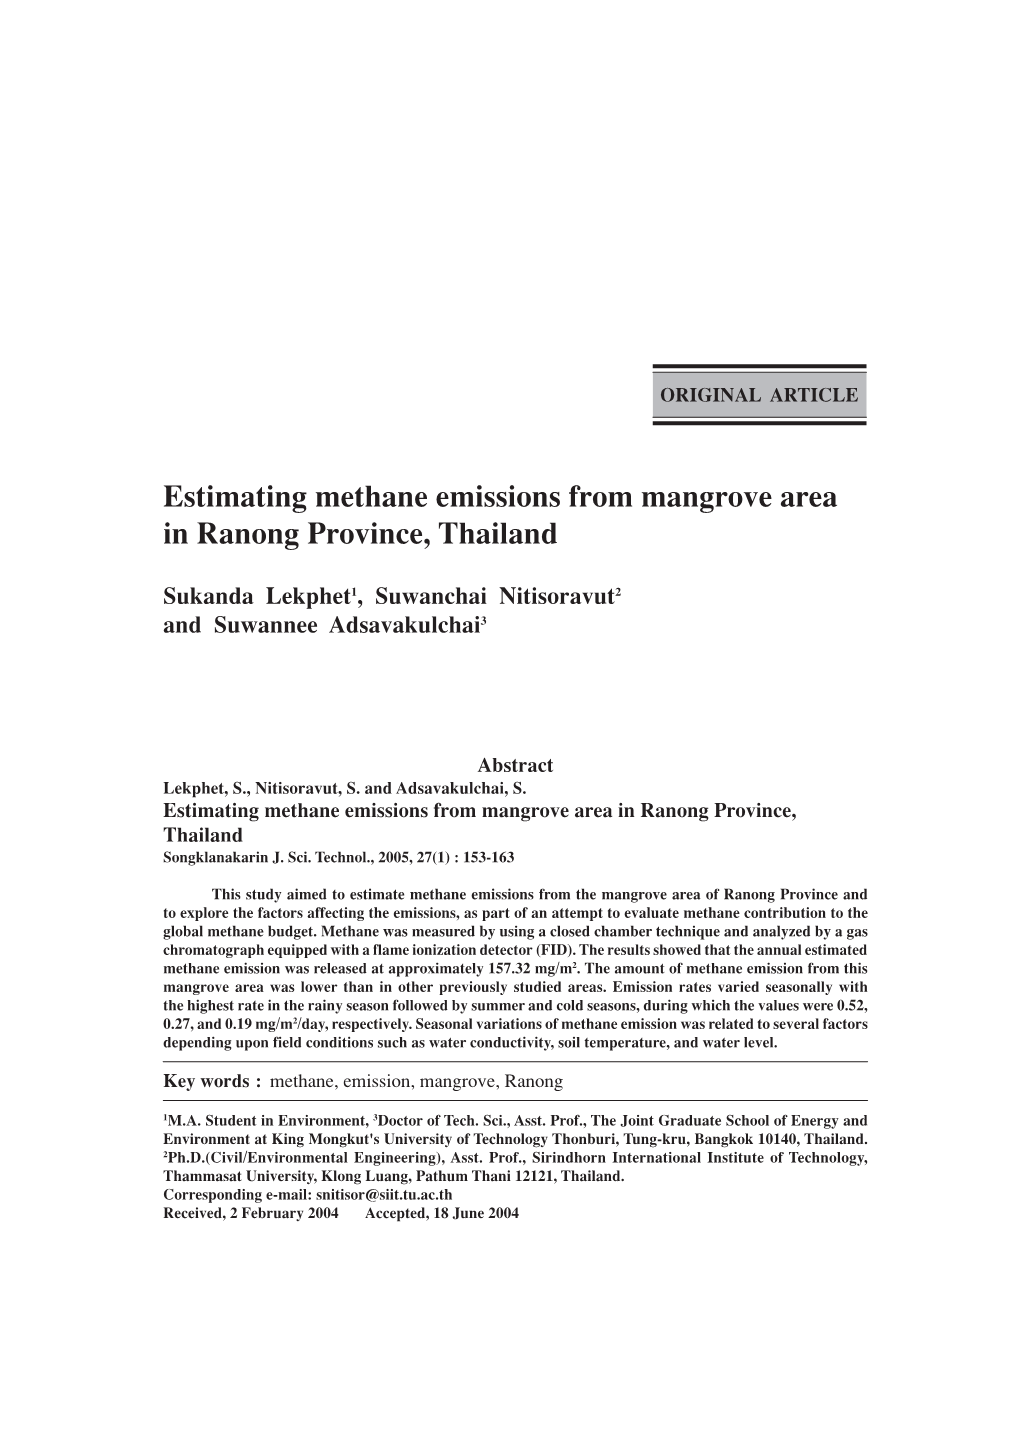 Estimating Methane Emissions from Mangrove Area in Ranong Province, Thailand